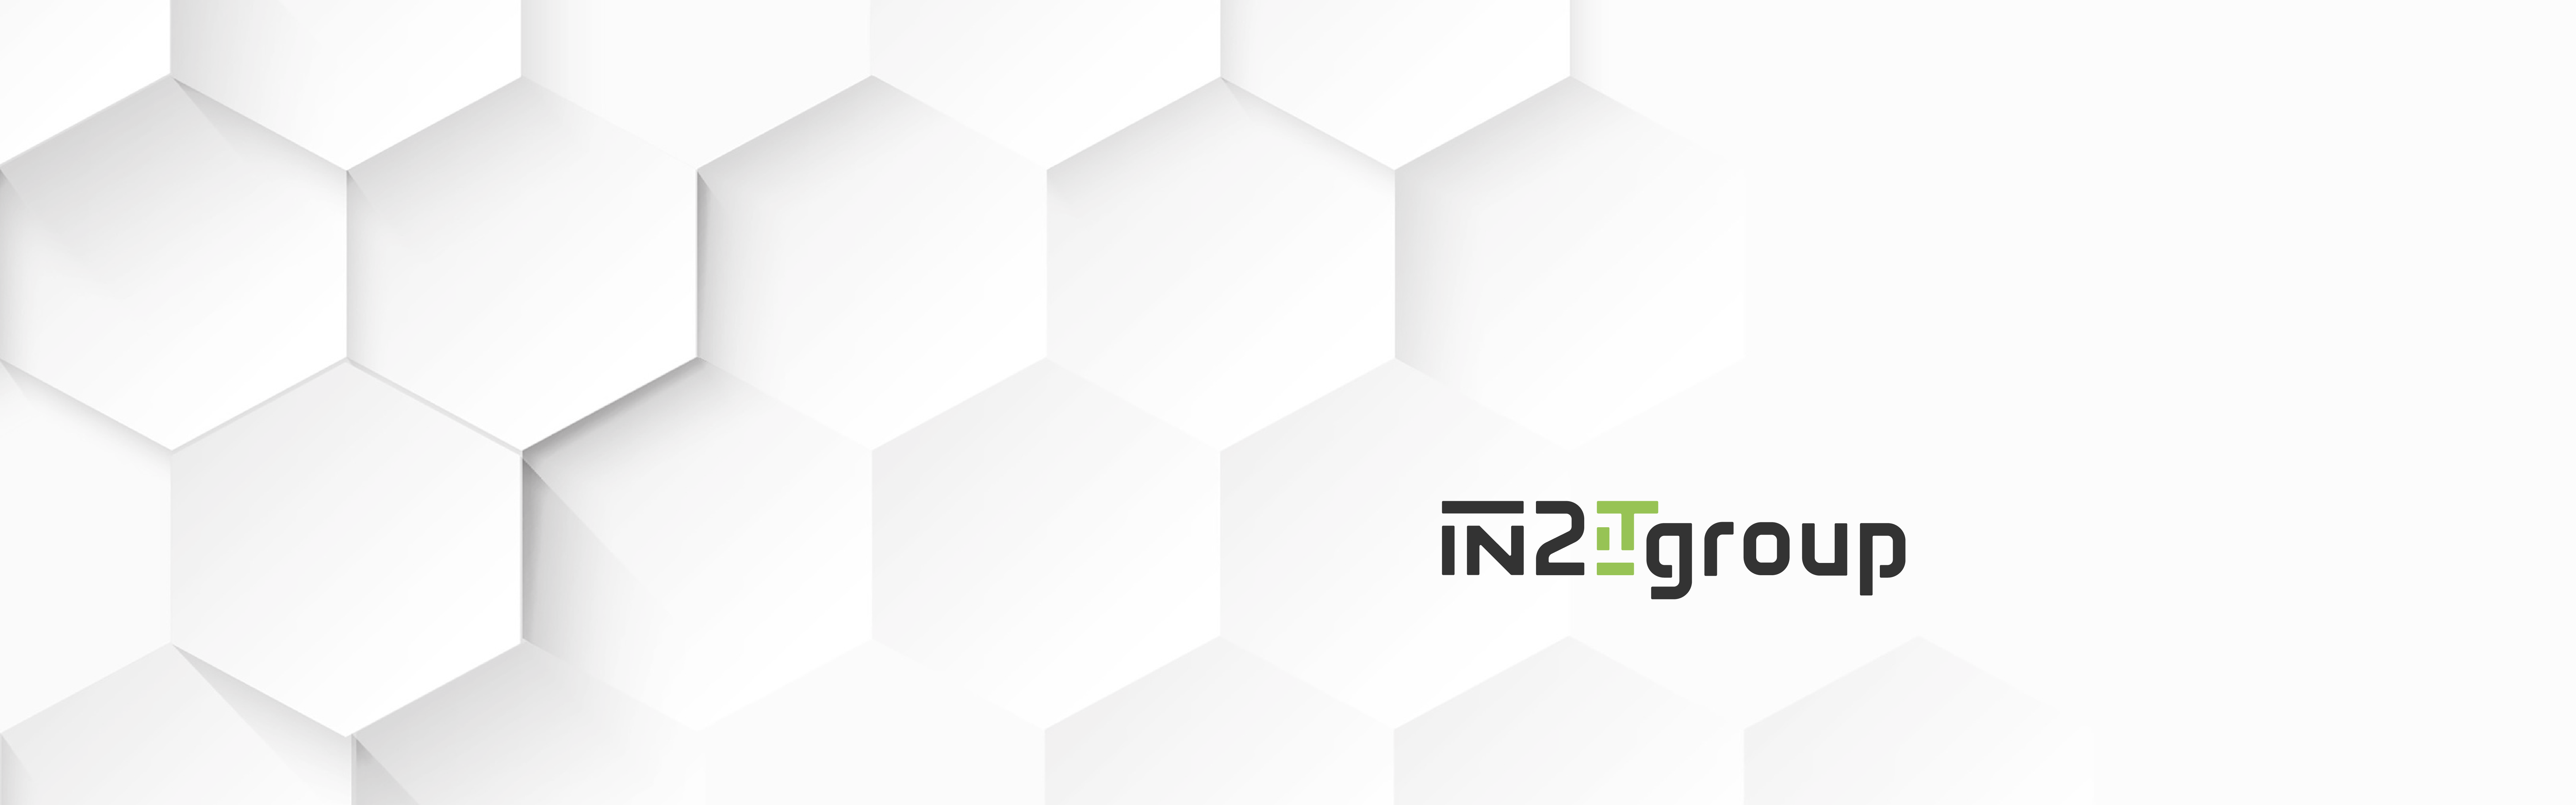 A graphic design featuring a white background with an array of hexagonal shapes to the left, transitioning from 3D to flat appearance, and text on the right that reads "IN2IT Group".